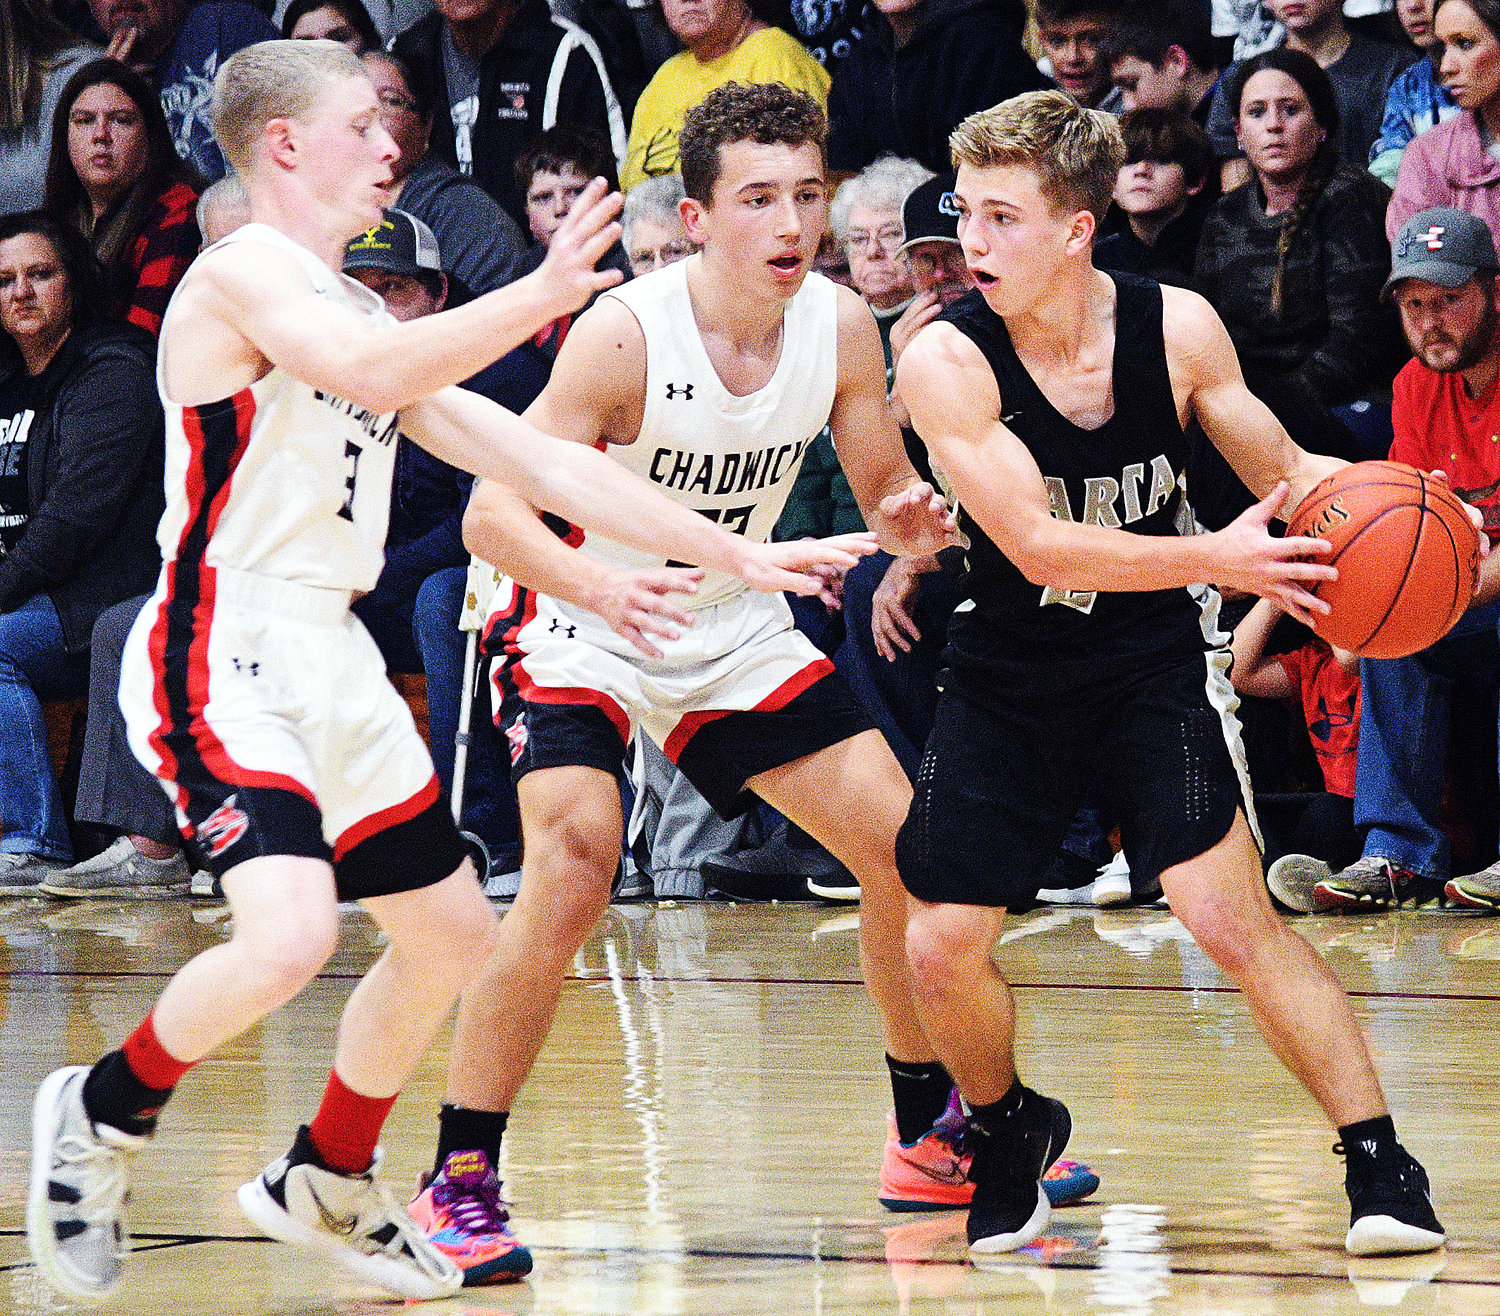 SPARTA’S WALKER LOVELAND looks for room around Chadwick’s Garrett Guerin and Tristan Smith in the teams’ matchup Tuesday.